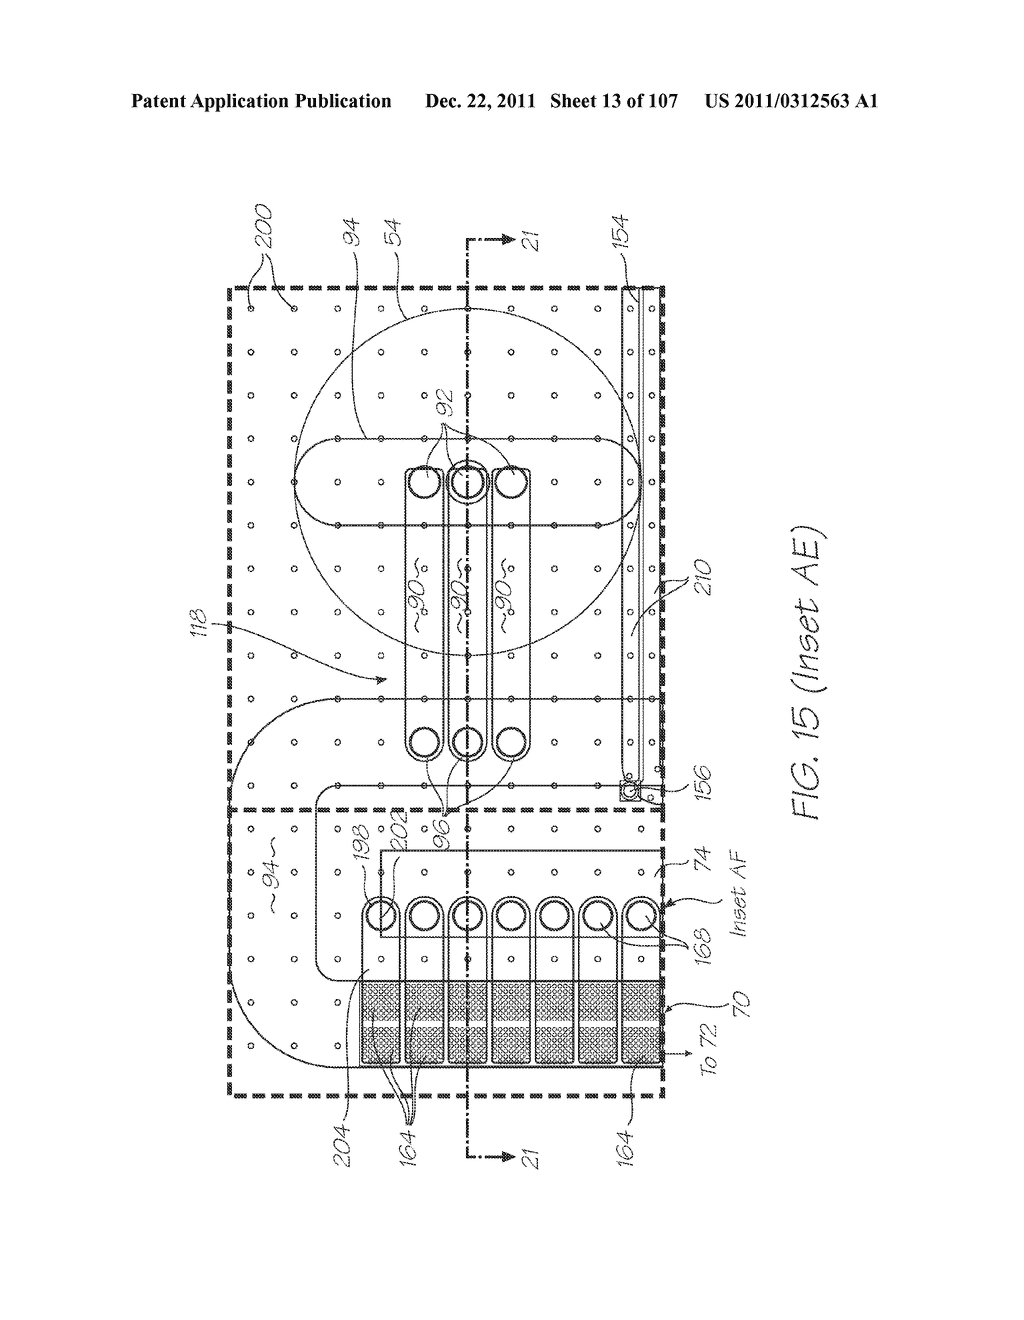 LOC DEVICE FOR DETECTING TARGET NUCLEIC ACID SEQUENCES IN A FLUID USING     HYBRIDIZATION CHAMBER ARRAY AND NEGATIVE CONTROL CHAMBER CONTAINING     ELECTROCHEMILUMINESCENT PROBE DESIGNED TO BE NON-COMPLEMENTARY TO ANY     SEQUENCE IN THE FLUID - diagram, schematic, and image 14